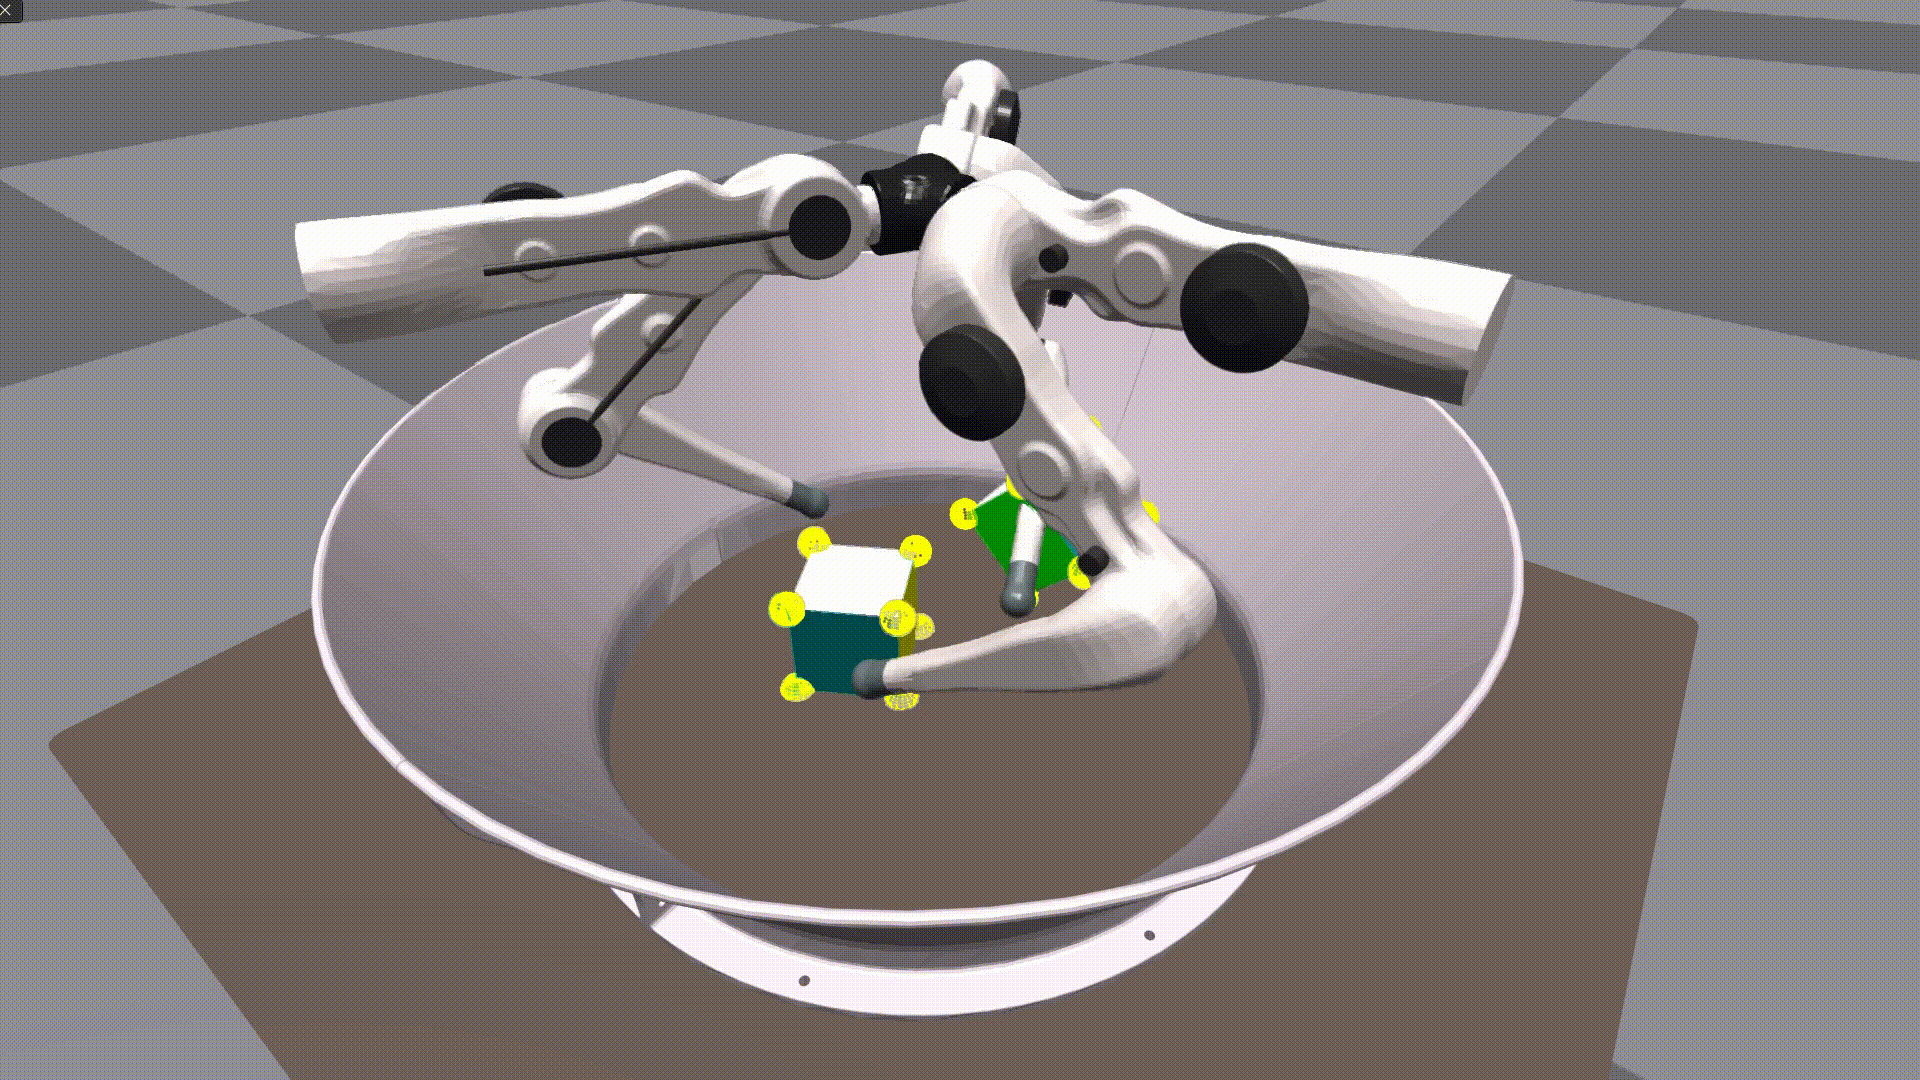 GIF of a robot successfully picking up a cube, with yellow dots on the vertices of the cube representing the keypoints used for pose representation.